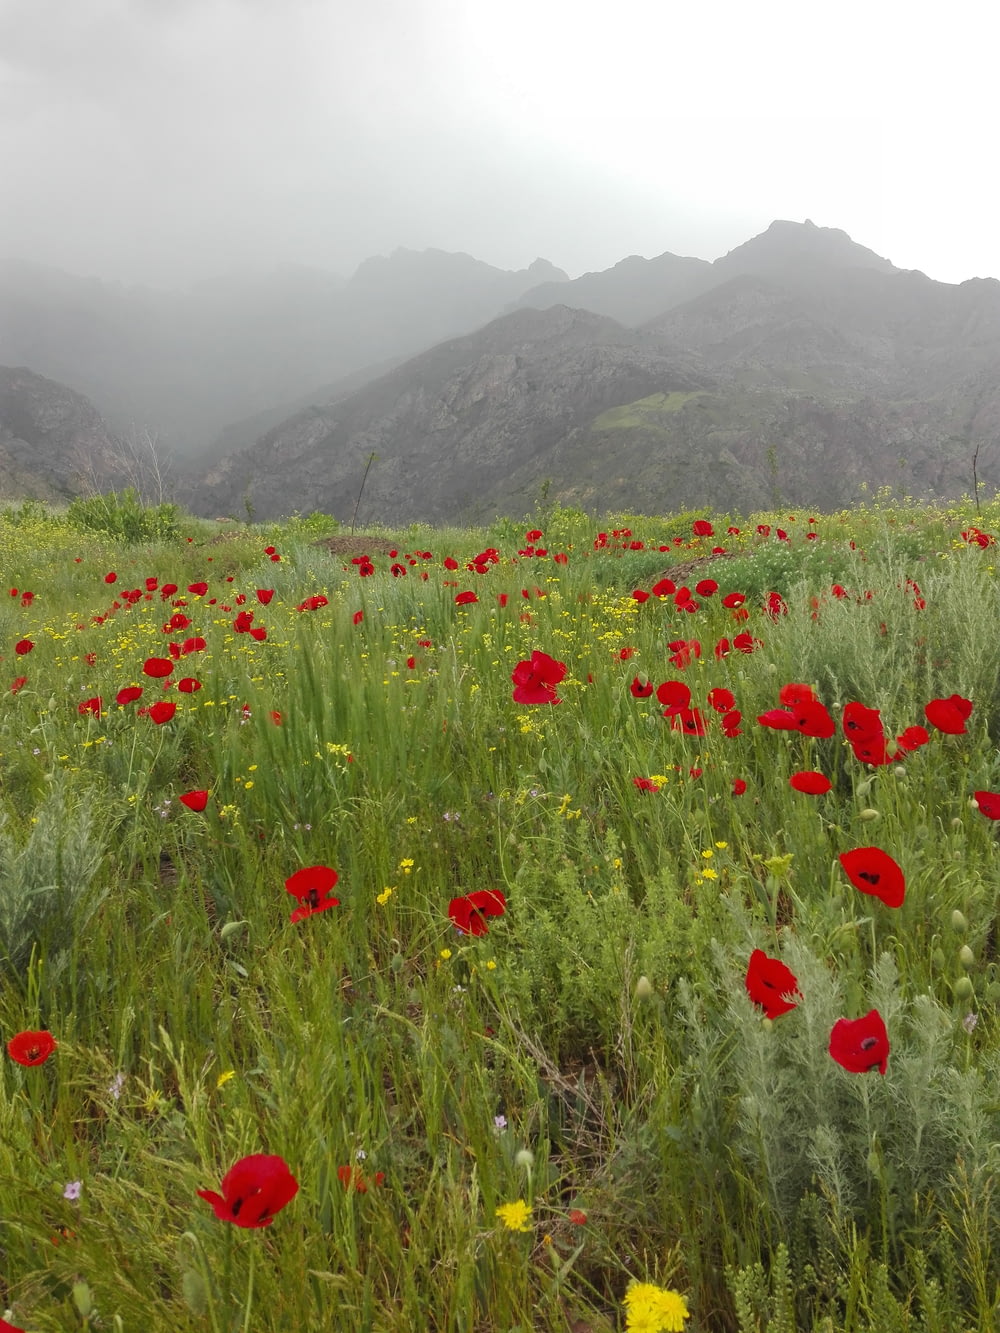 red flower field near green mountains during daytime